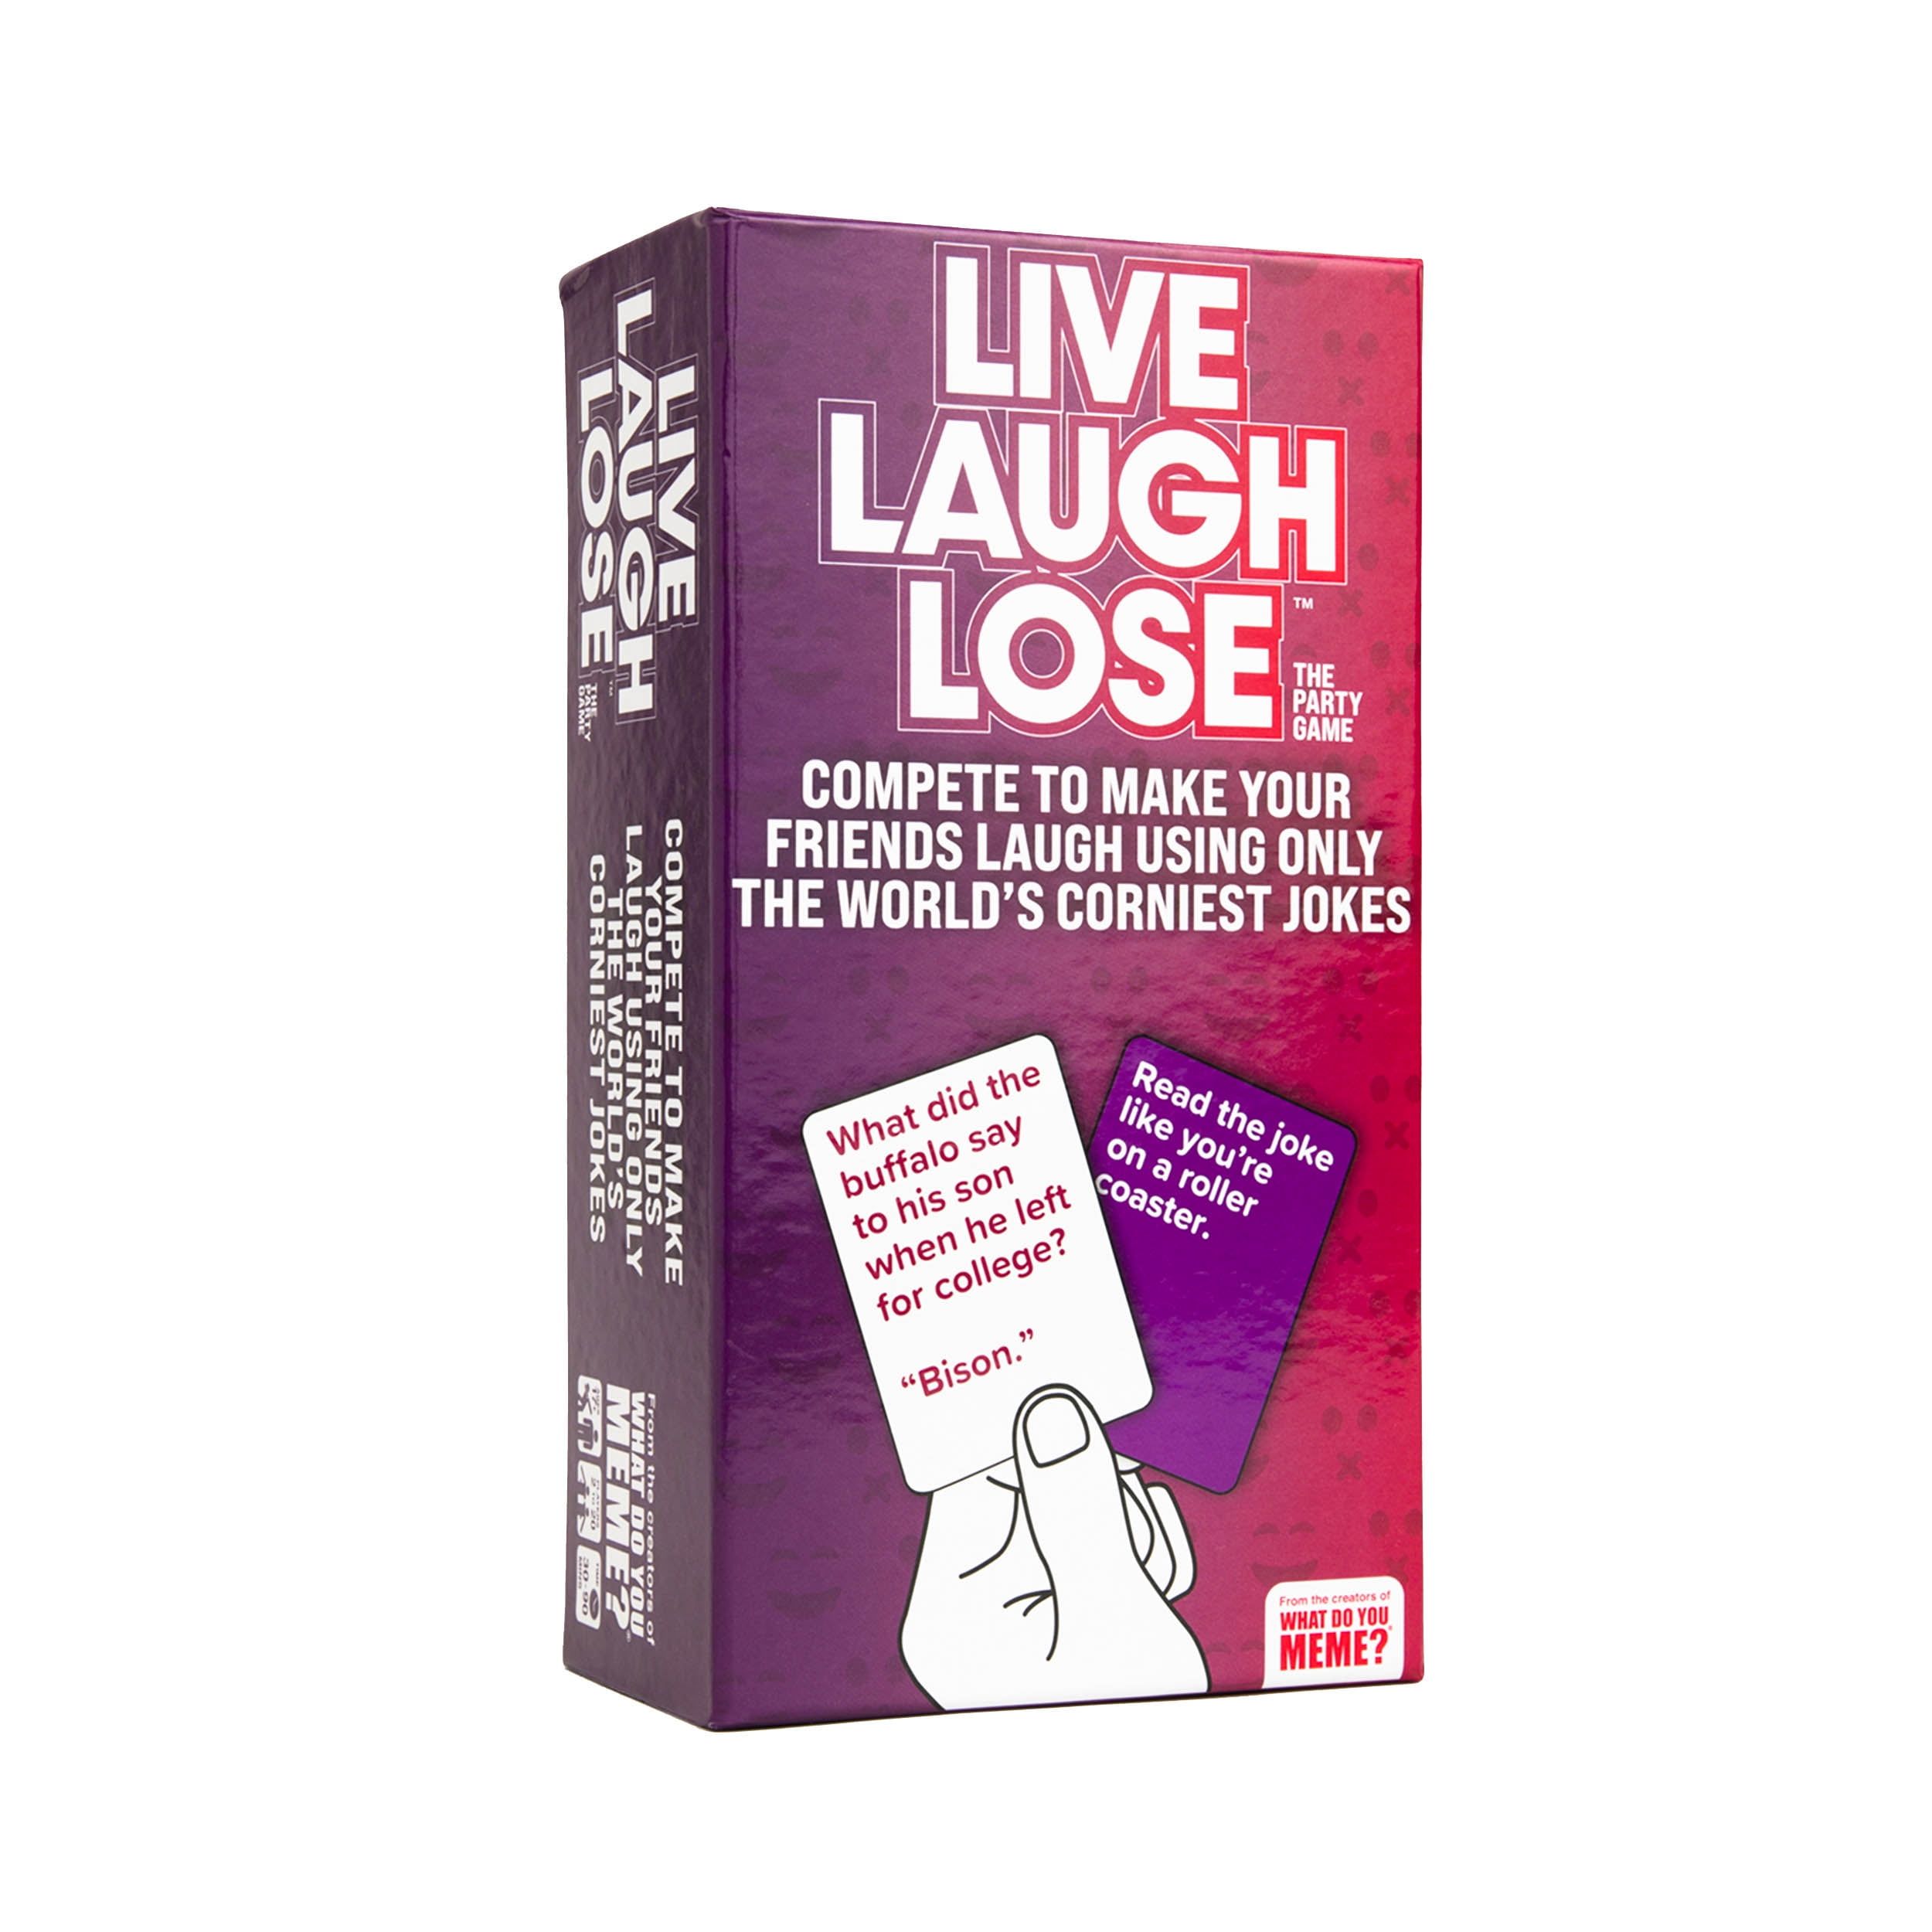 Live Laugh Lose - The Adult Party Game Where You Compete to Make Corny Jokes Funny - Card Game by What Do You Meme?